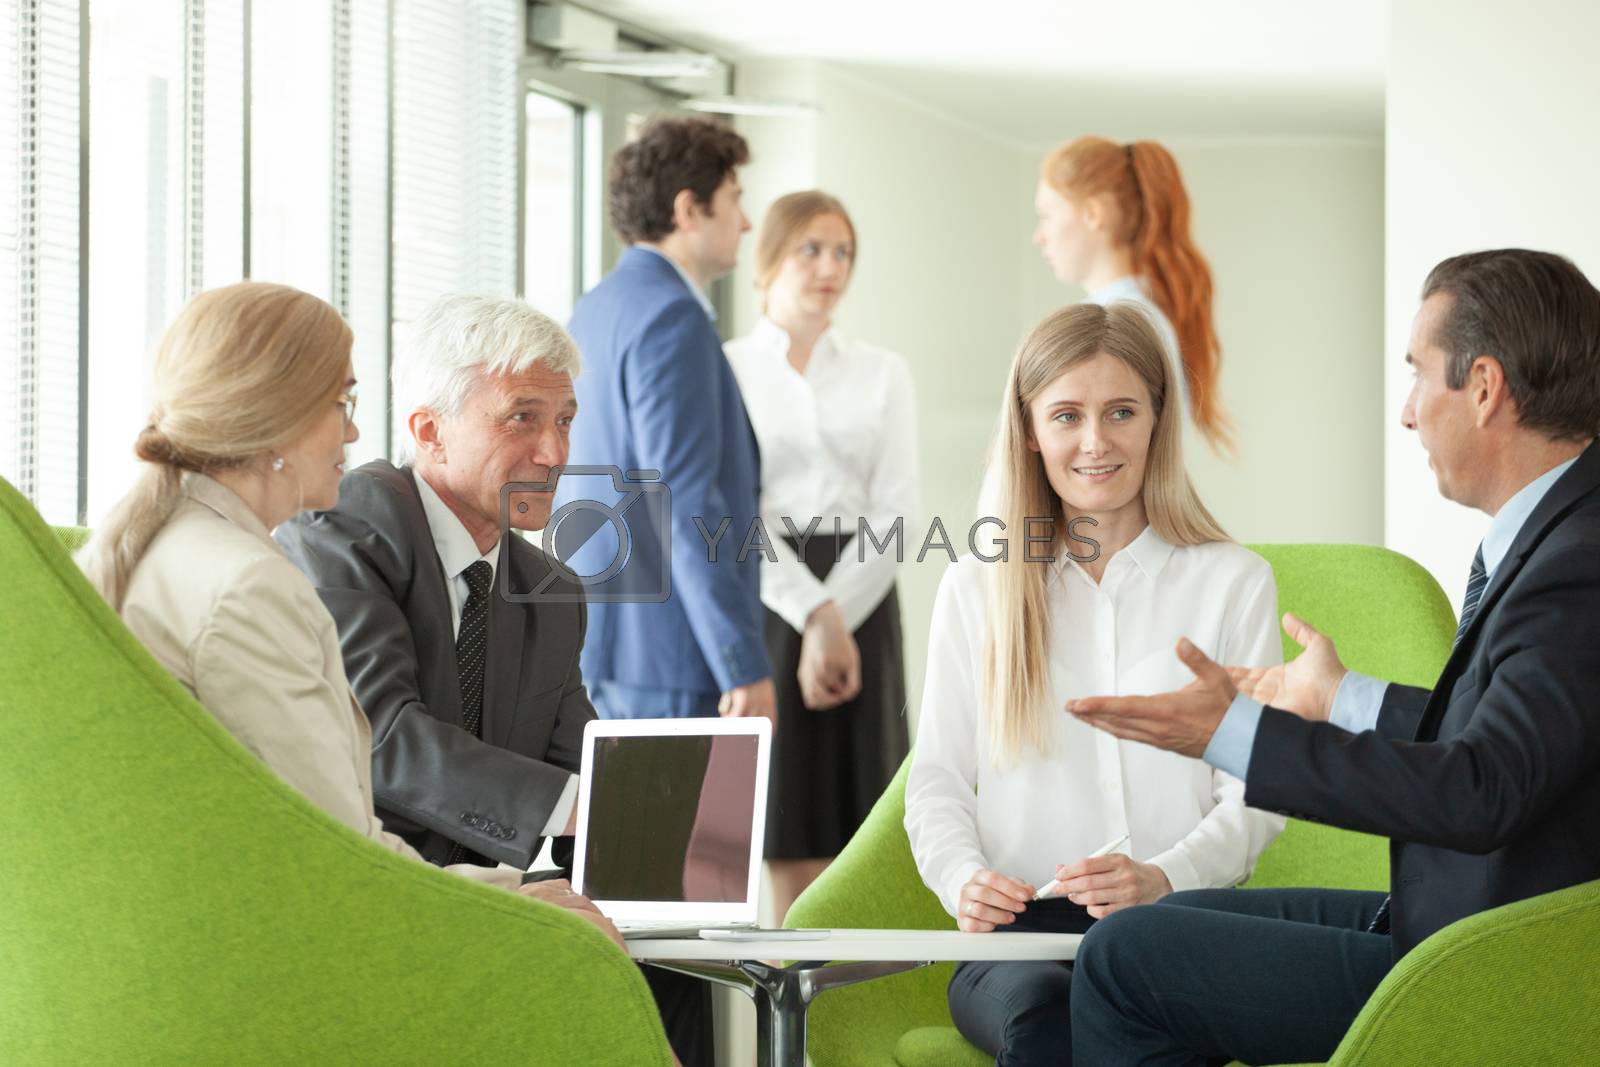 Royalty free image of Business people at negotiation by ALotOfPeople